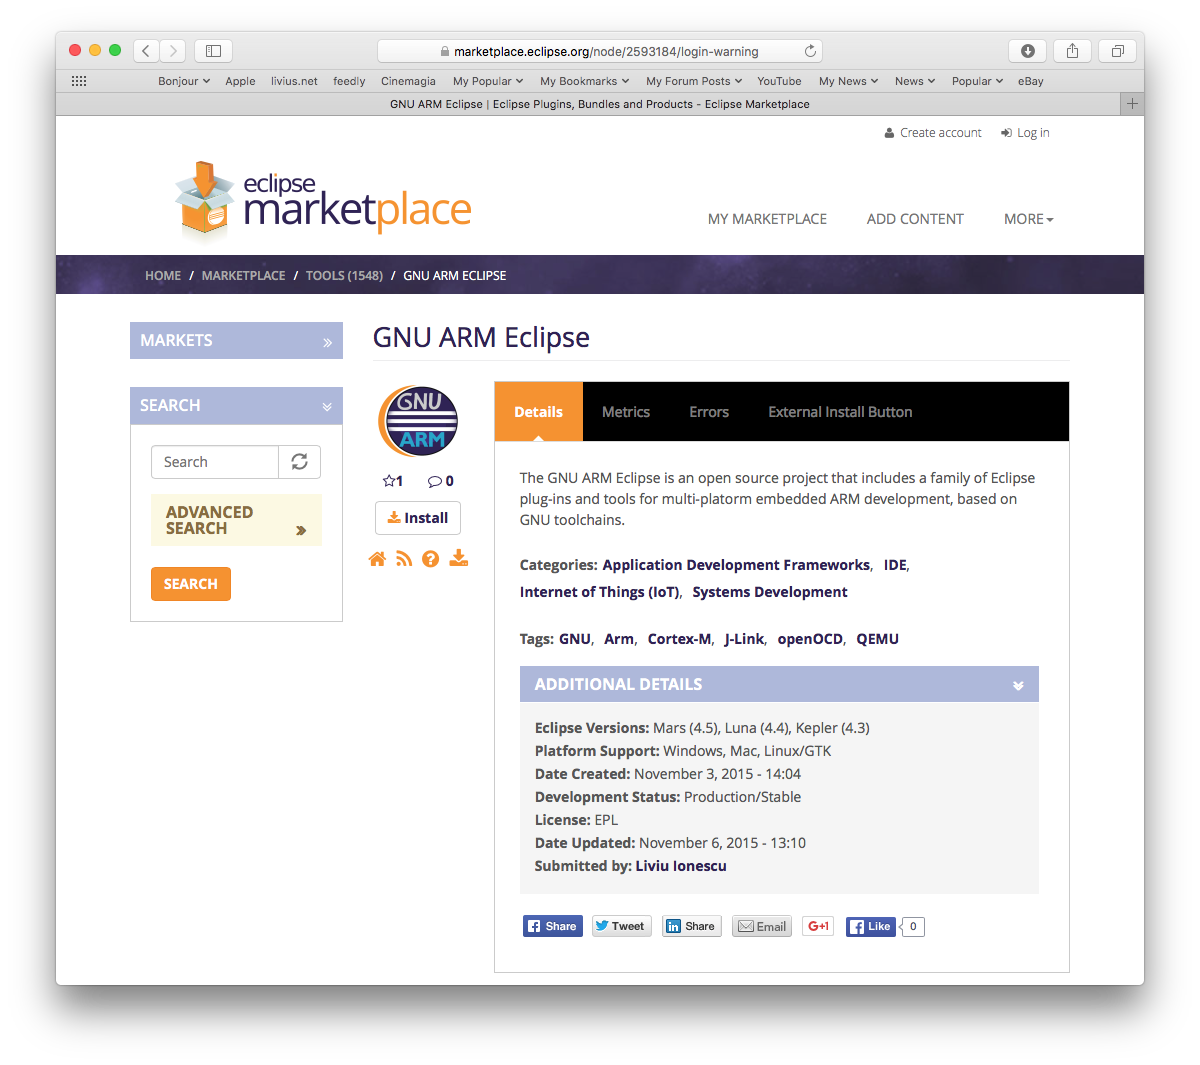 eclipse-marketplace-home.png